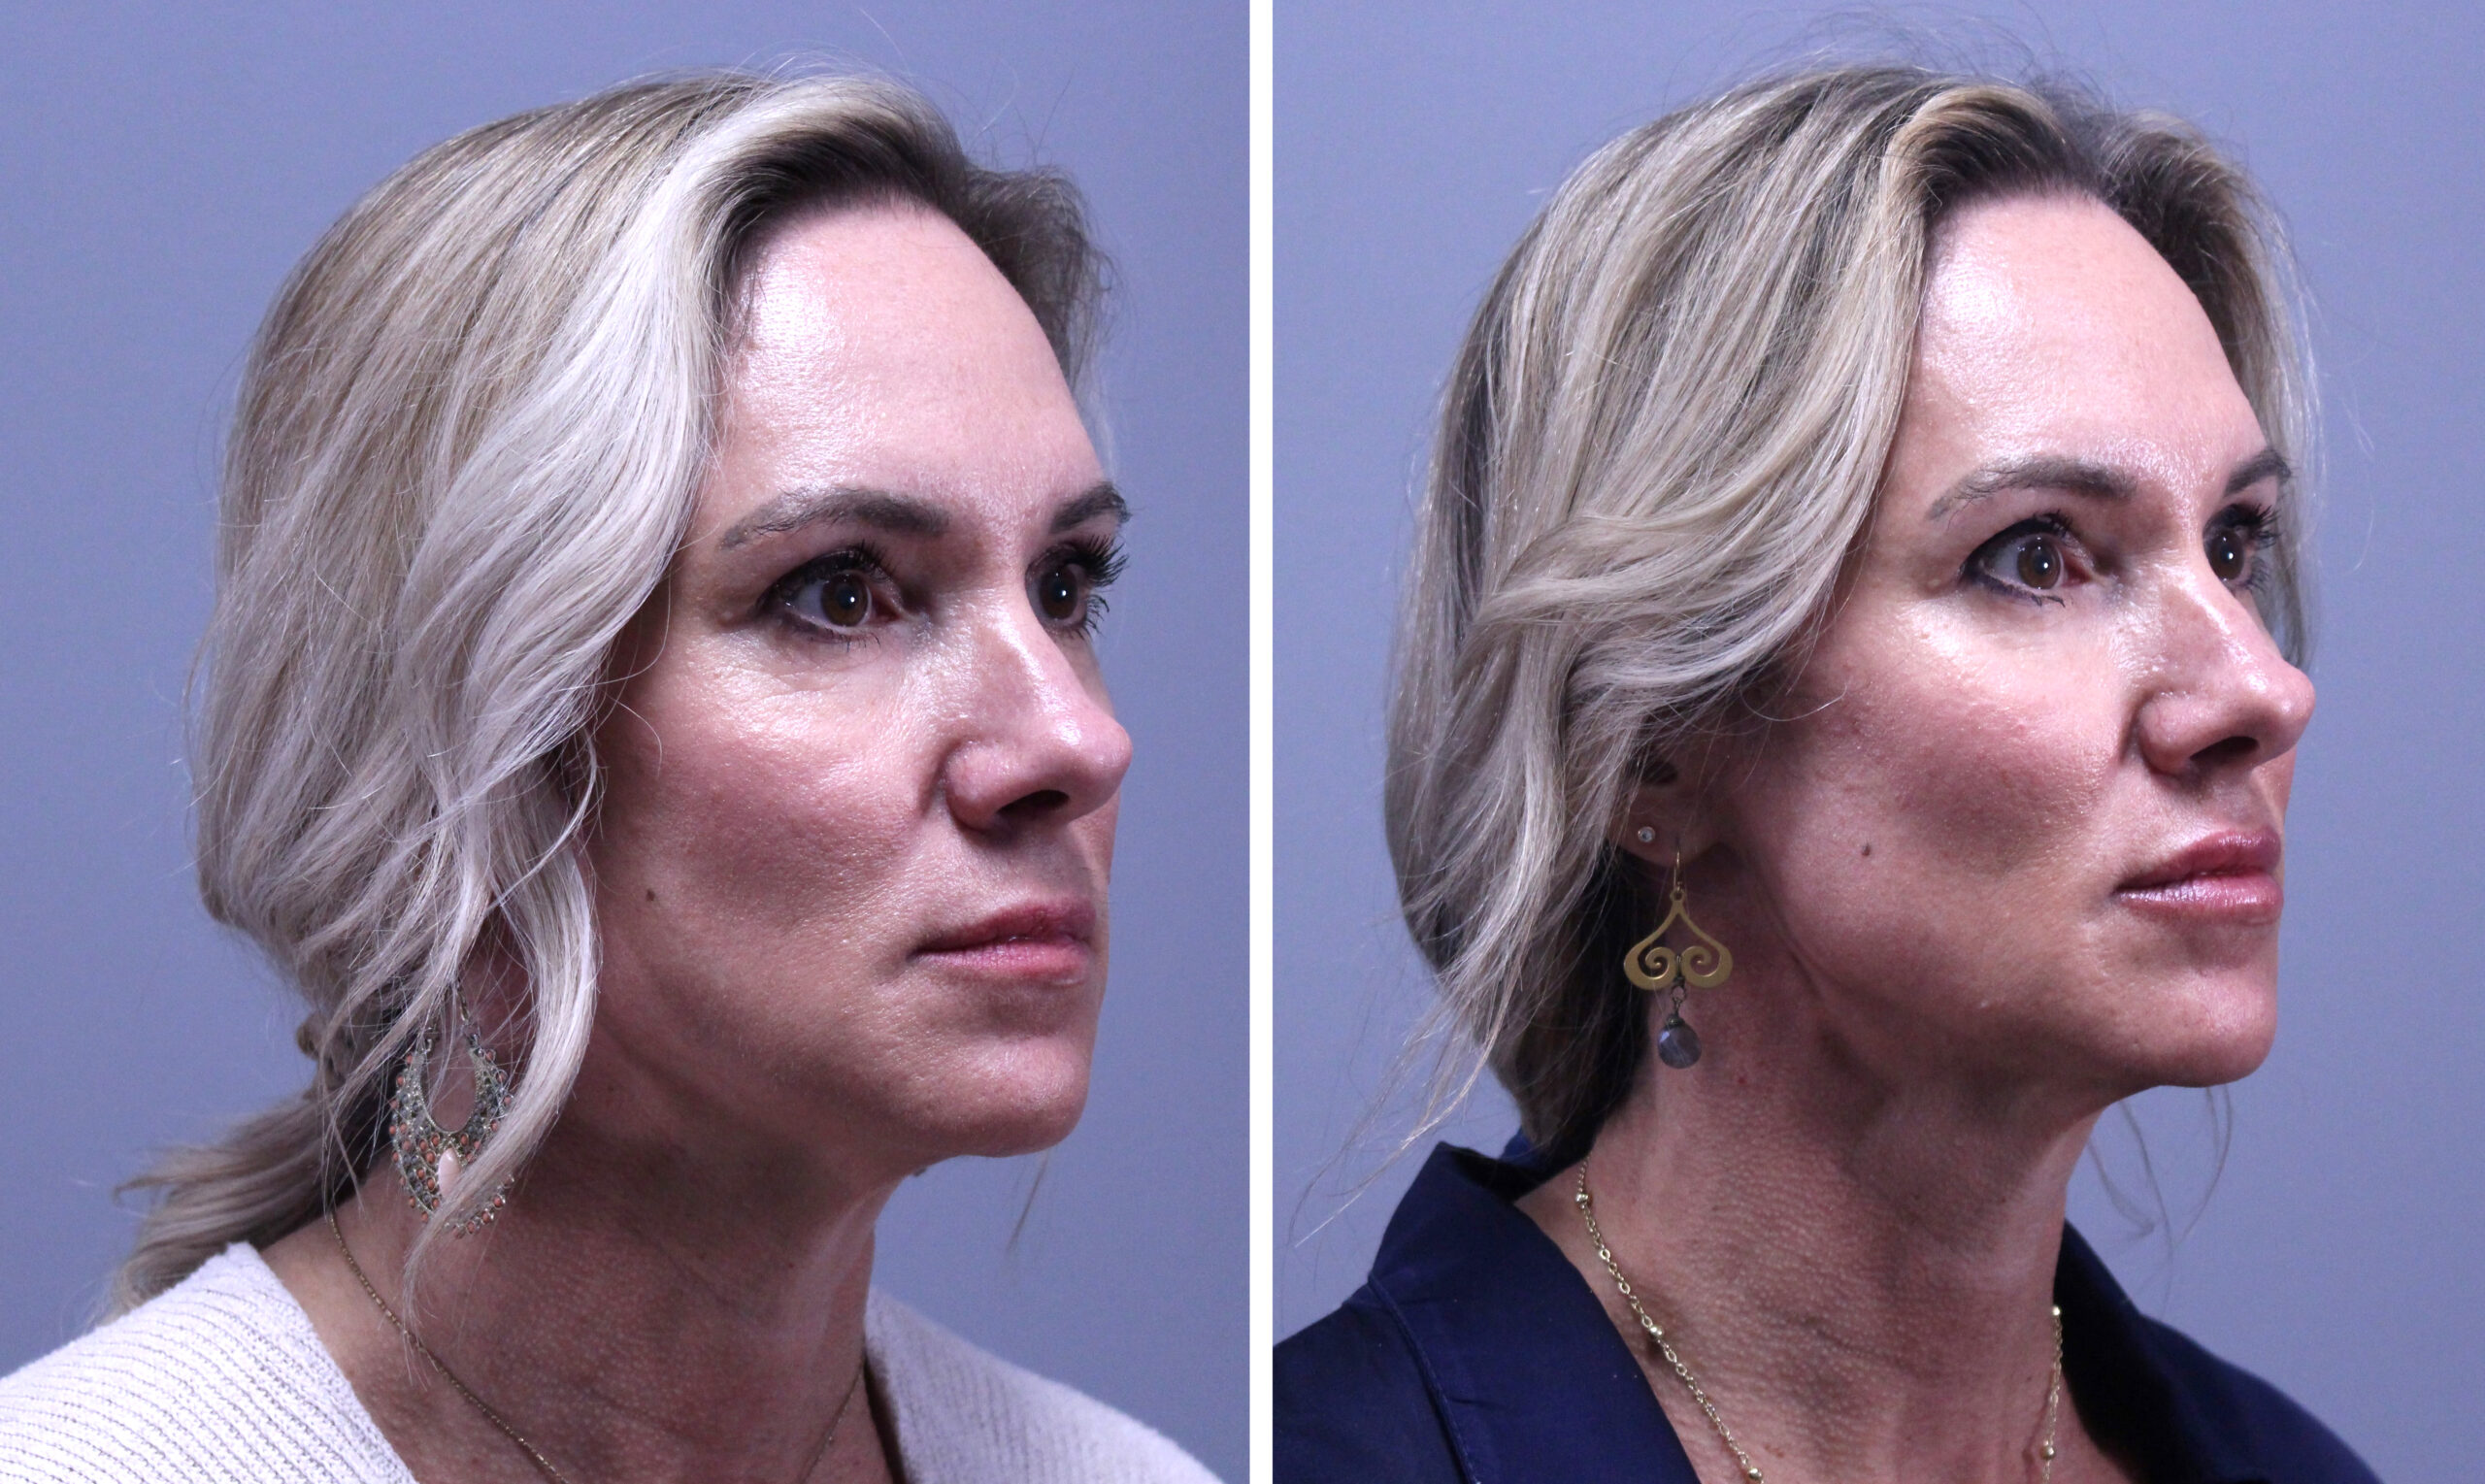 Juvederm Voluma Before and After Pictures St. Petersburg, FL